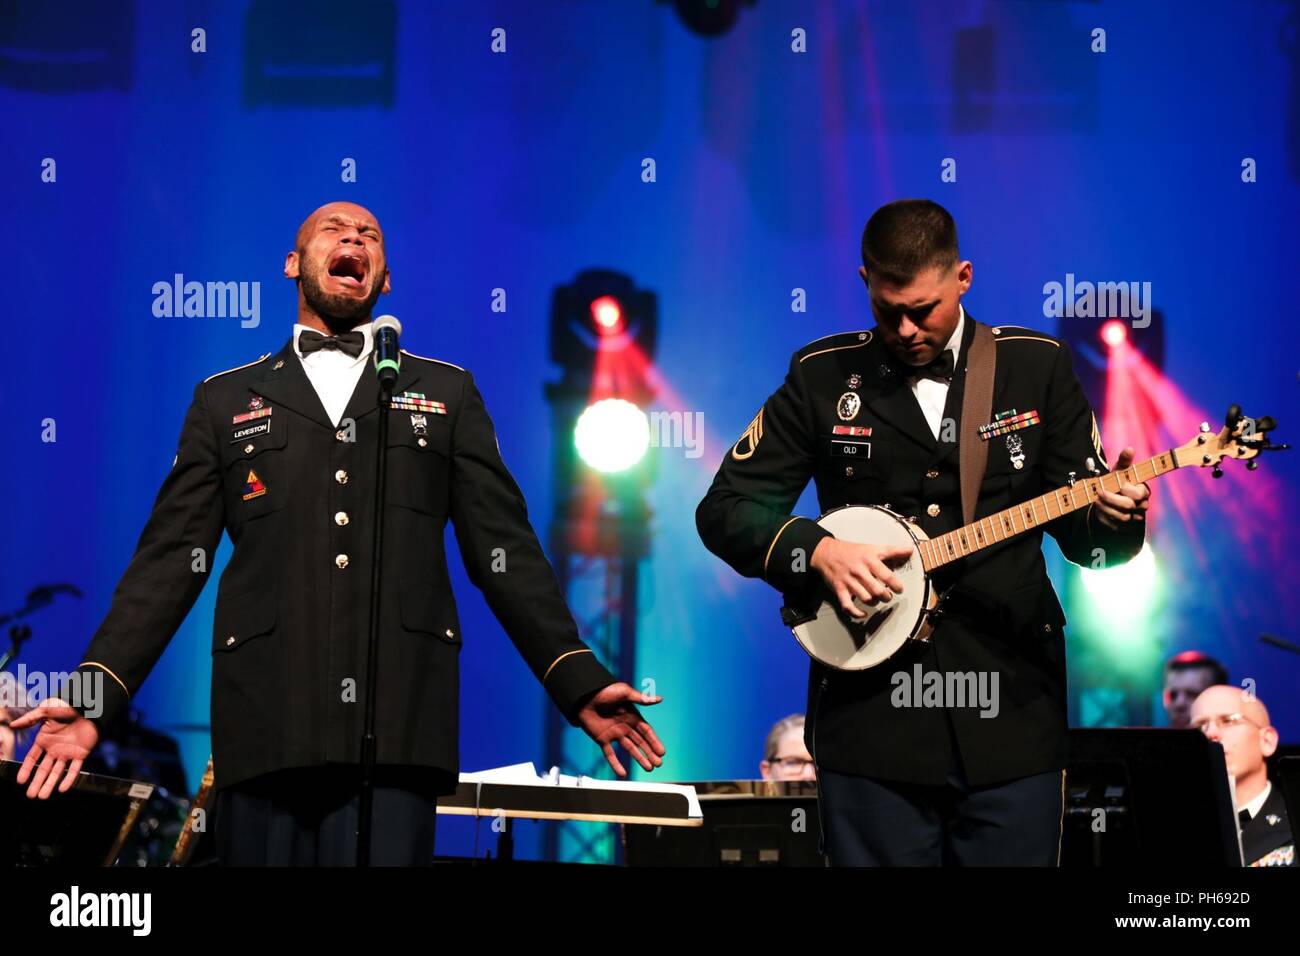 U.S. Army Spc. Joseph Leveston vocalist and Staff Sgt. James Old on the banjo soldiers with the 389th U.S. Army Materiel Command Band perform banjo music of the Tennessee Valley at Bob Jones High School, Alabama, June 26, 2018. The AMC Band performed to a packed audience during their final concert before inactivation. Stock Photo